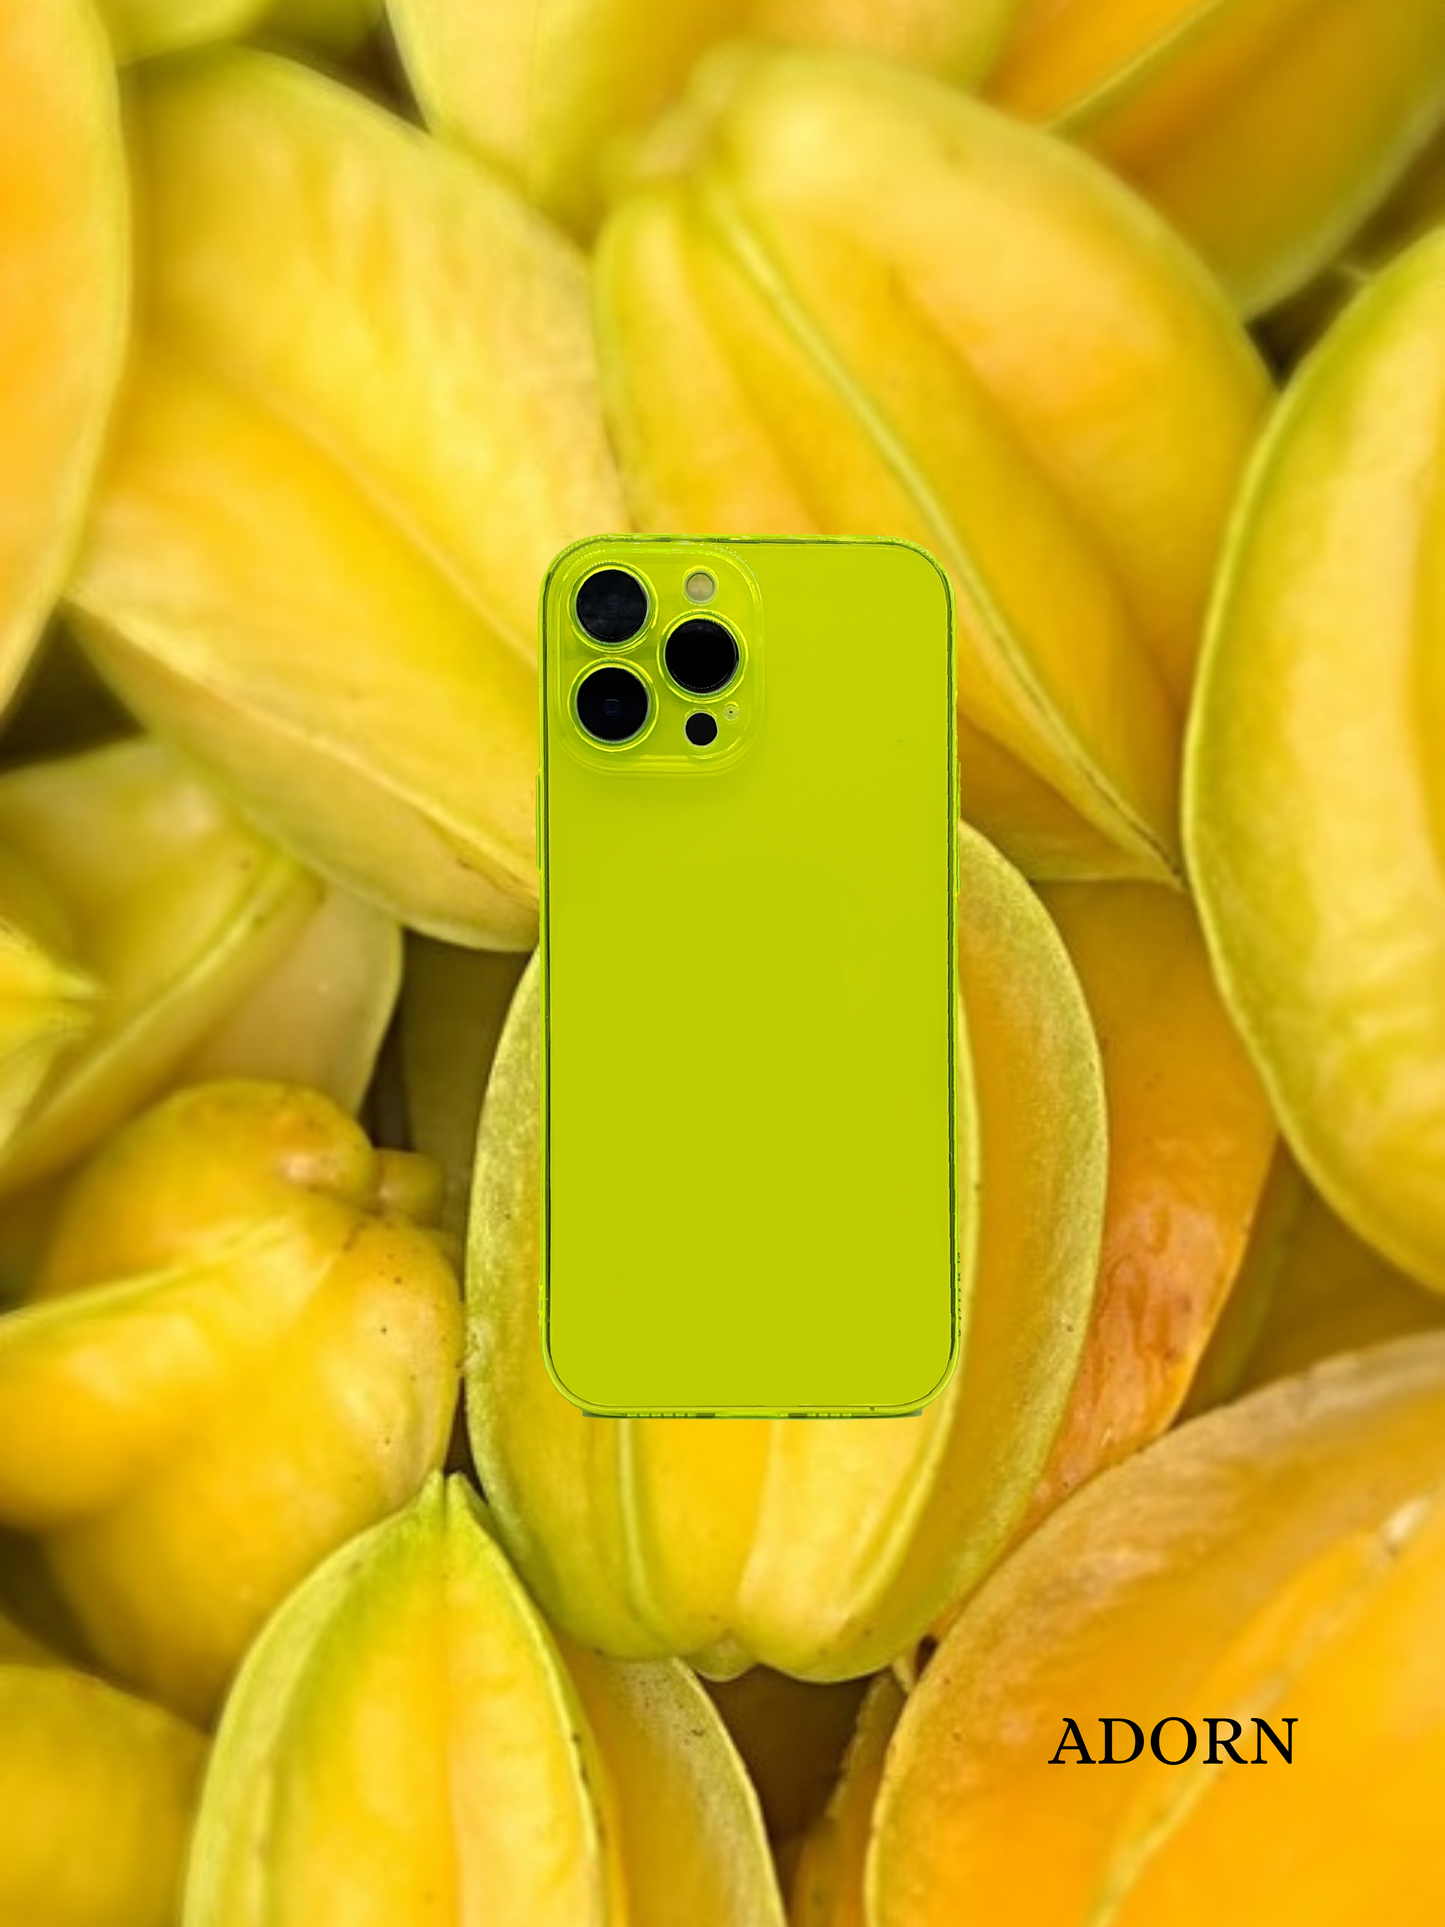 Starfruit - Adorn Phone Accessories, lime green, yellow, Apple iPhone  case, jelly style, back camera view